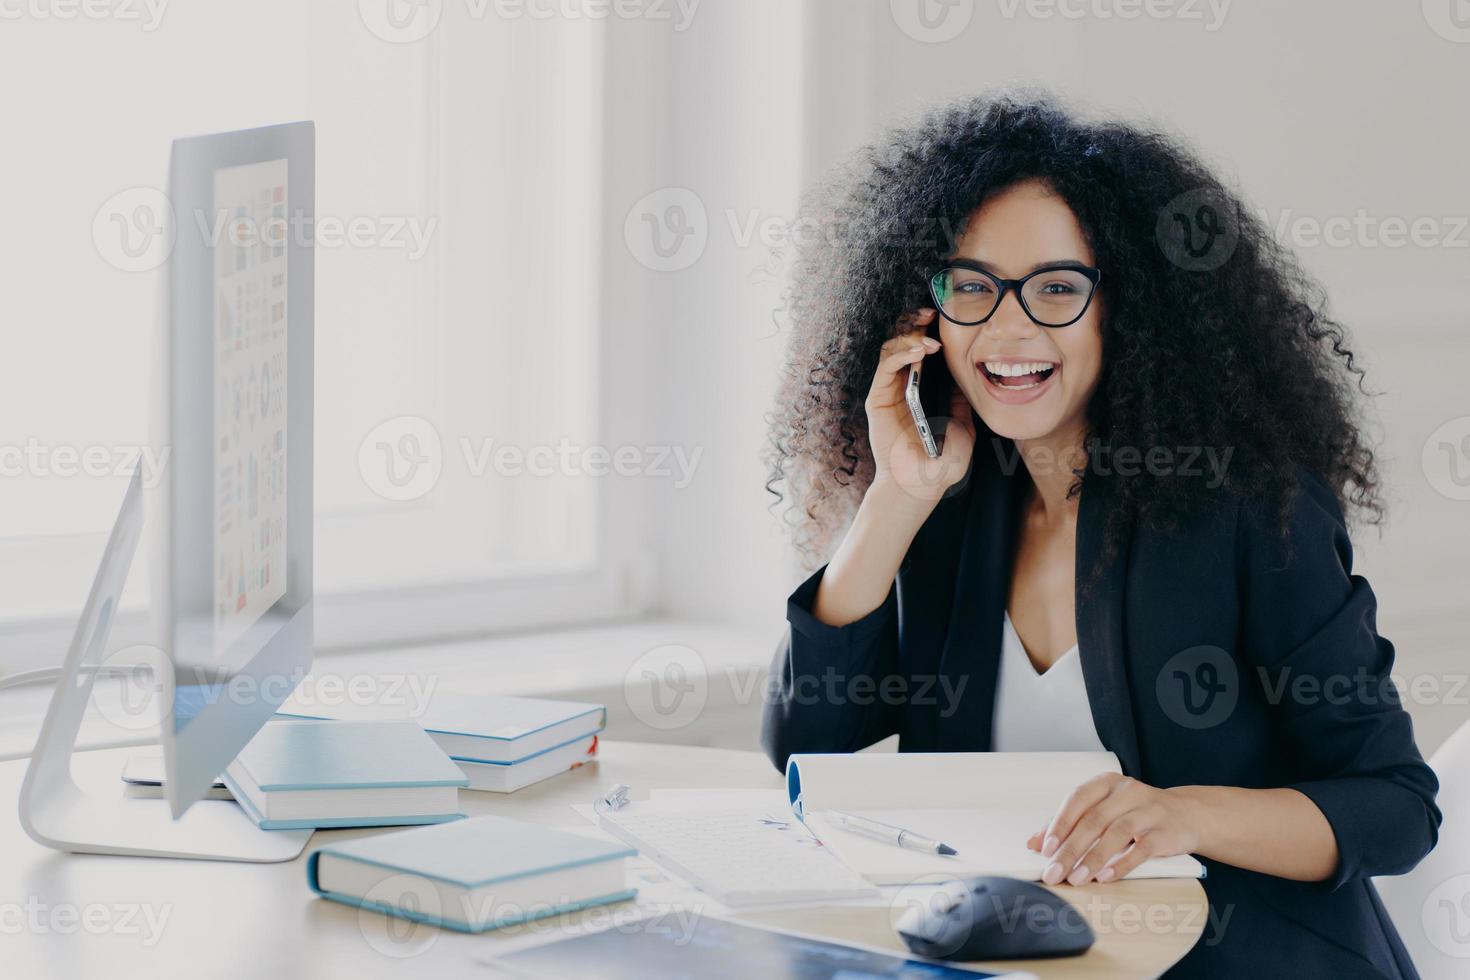 Optimistic female Afro American entrepreneur with curly hairstyle, holds mobile phone, enjoys telephone conversation with colleague, works on computer, poses at workplace with notepad and books photo